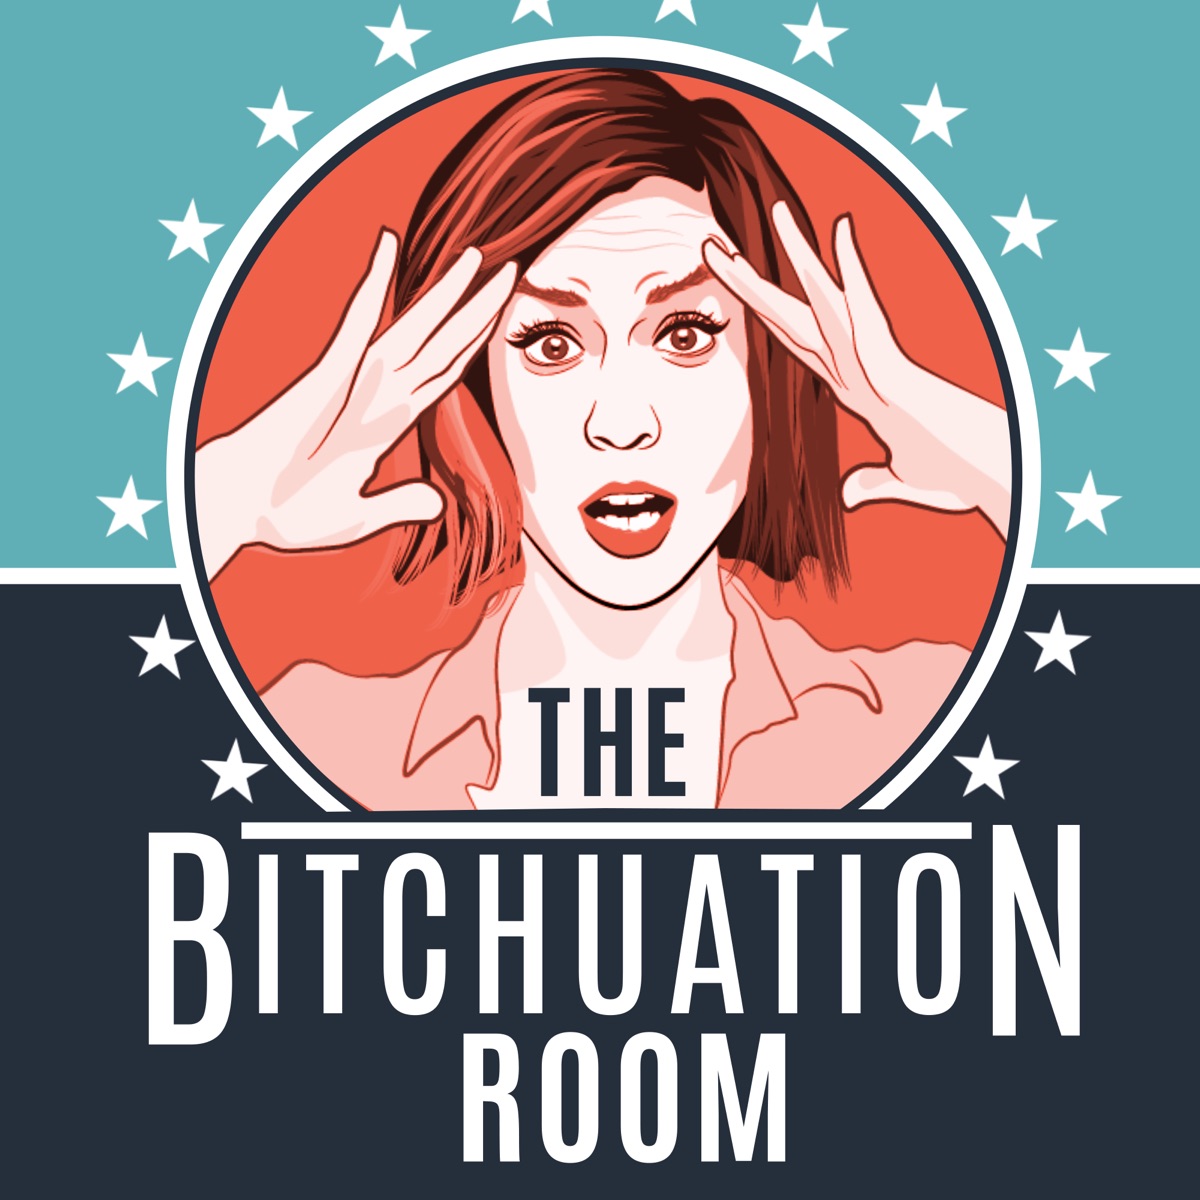 The Bitchuation Room